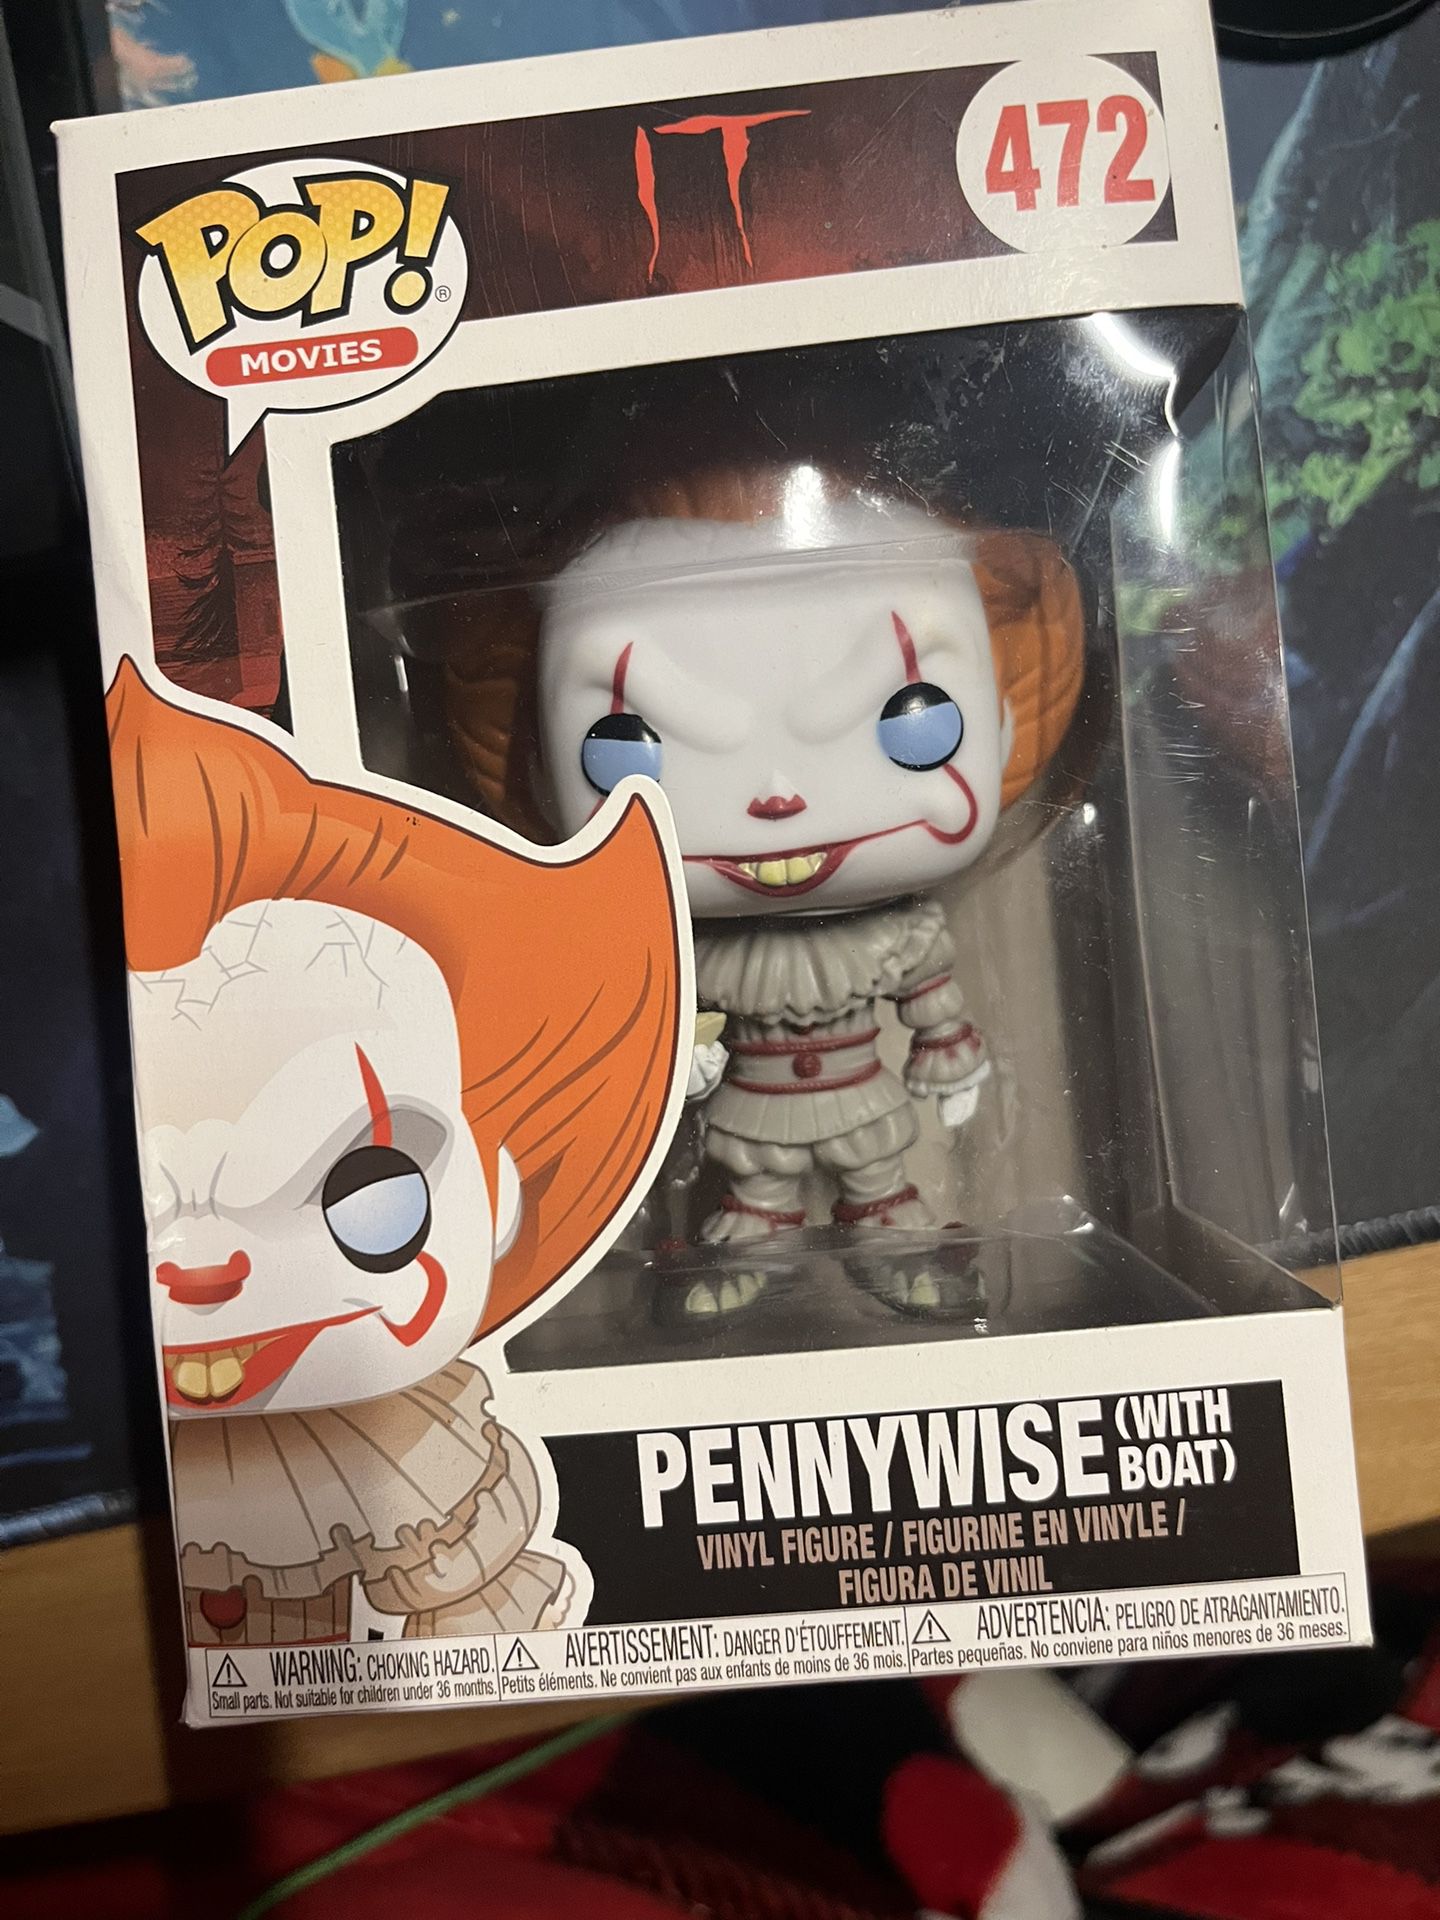 Funko Pennywise 